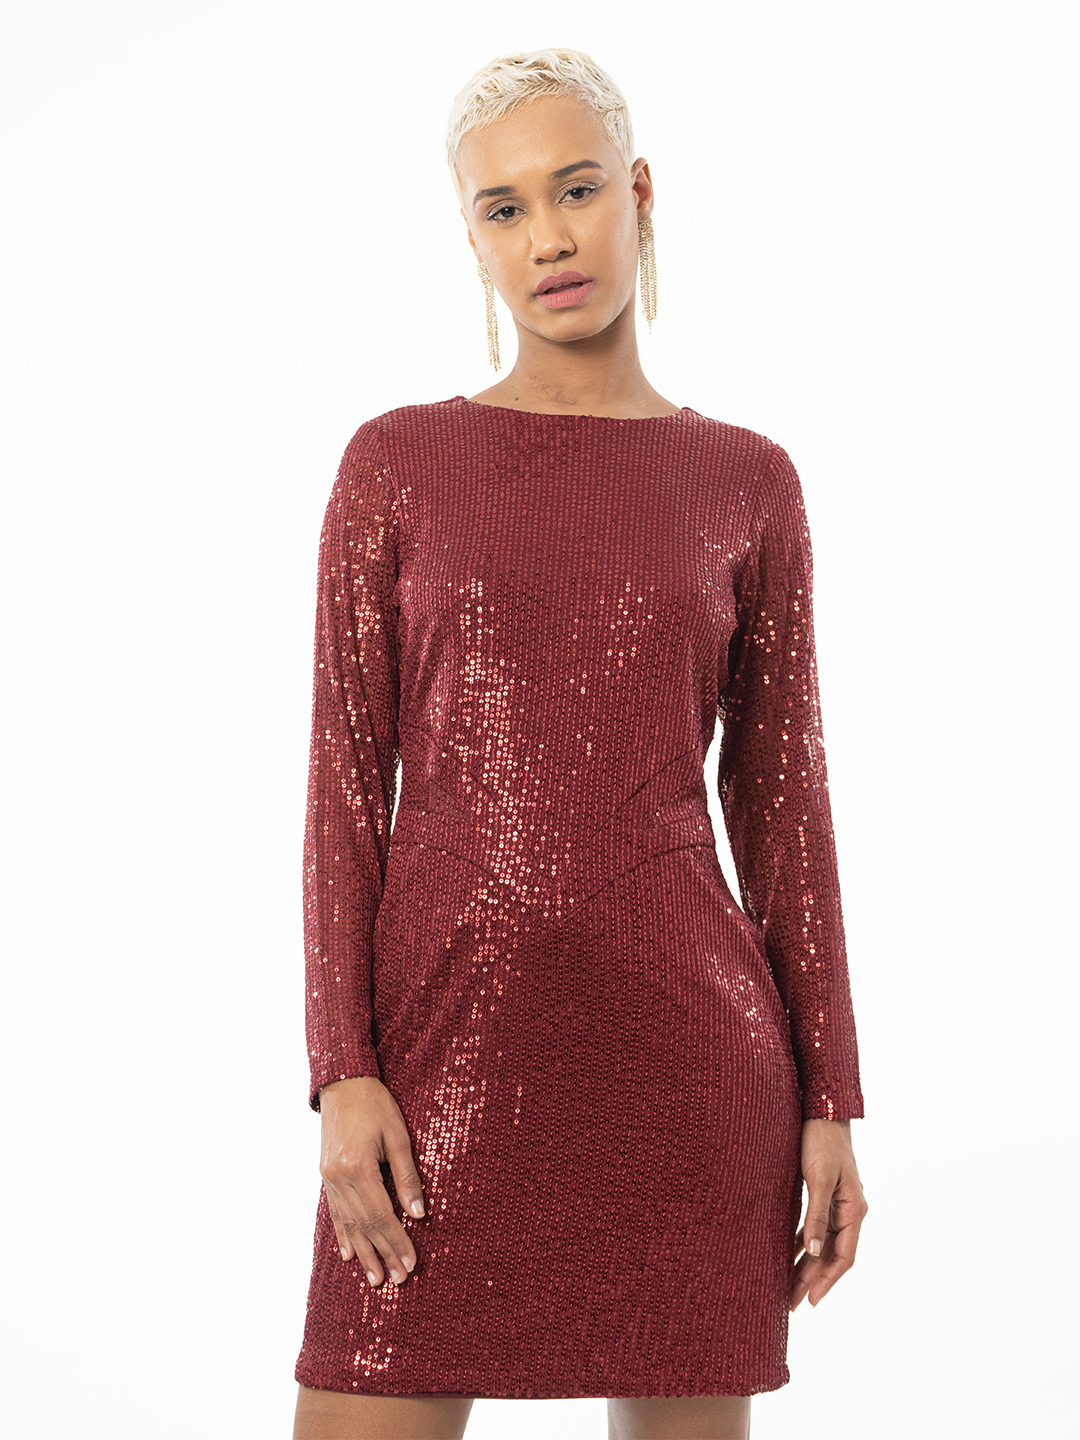 Sheer Cut Out Bodycon Burgundy Dress - Front